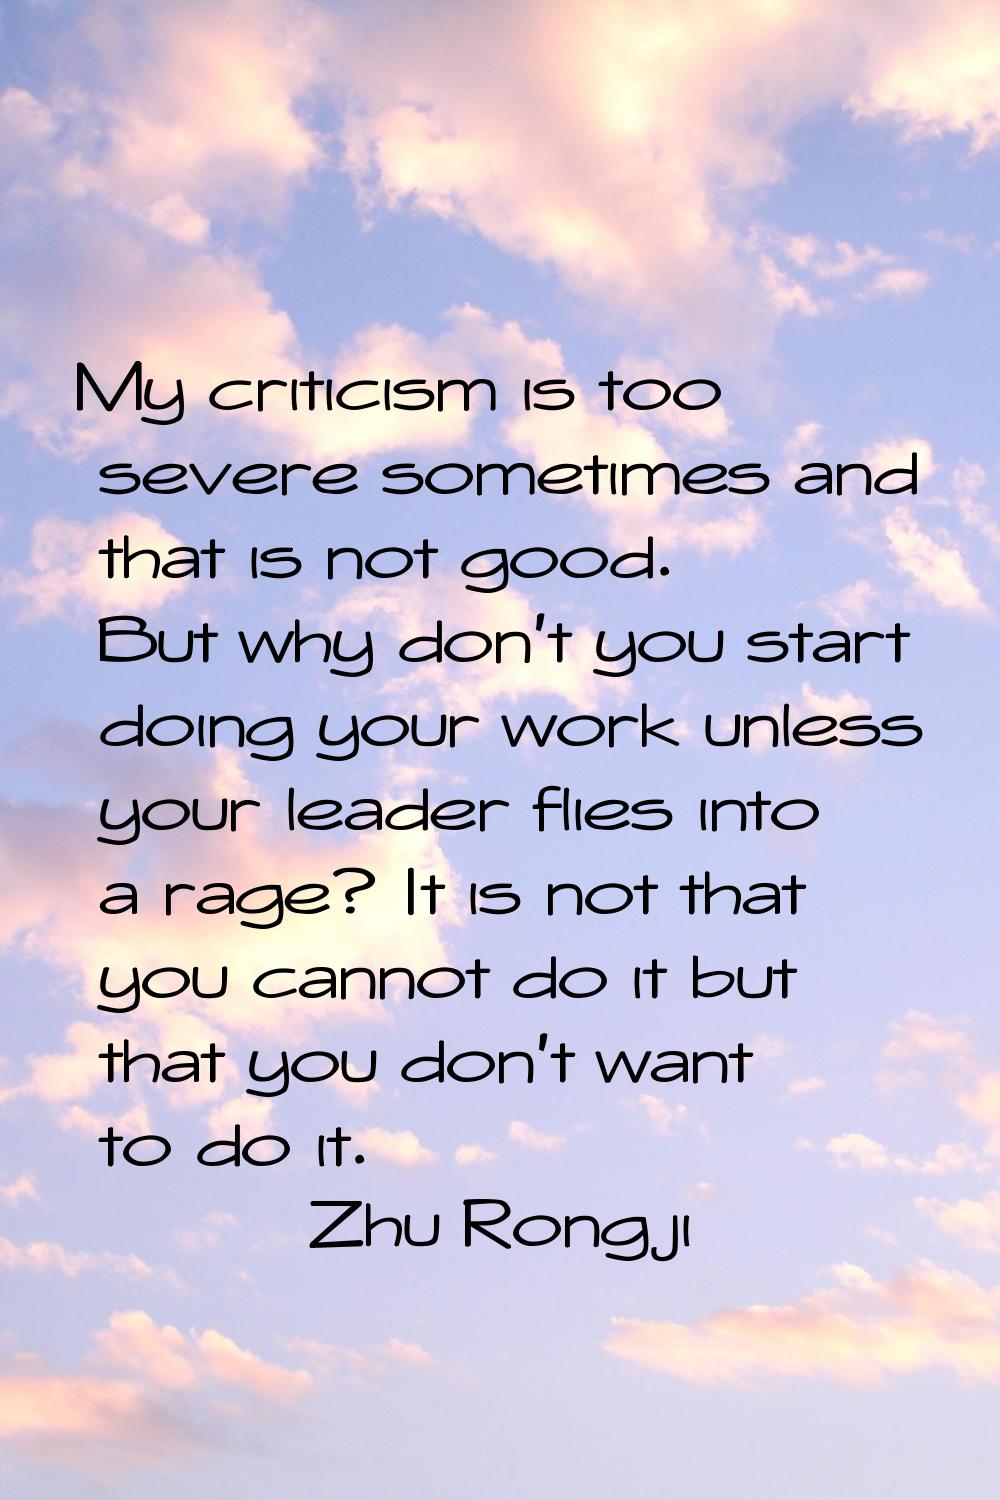 My criticism is too severe sometimes and that is not good. But why don't you start doing your work 